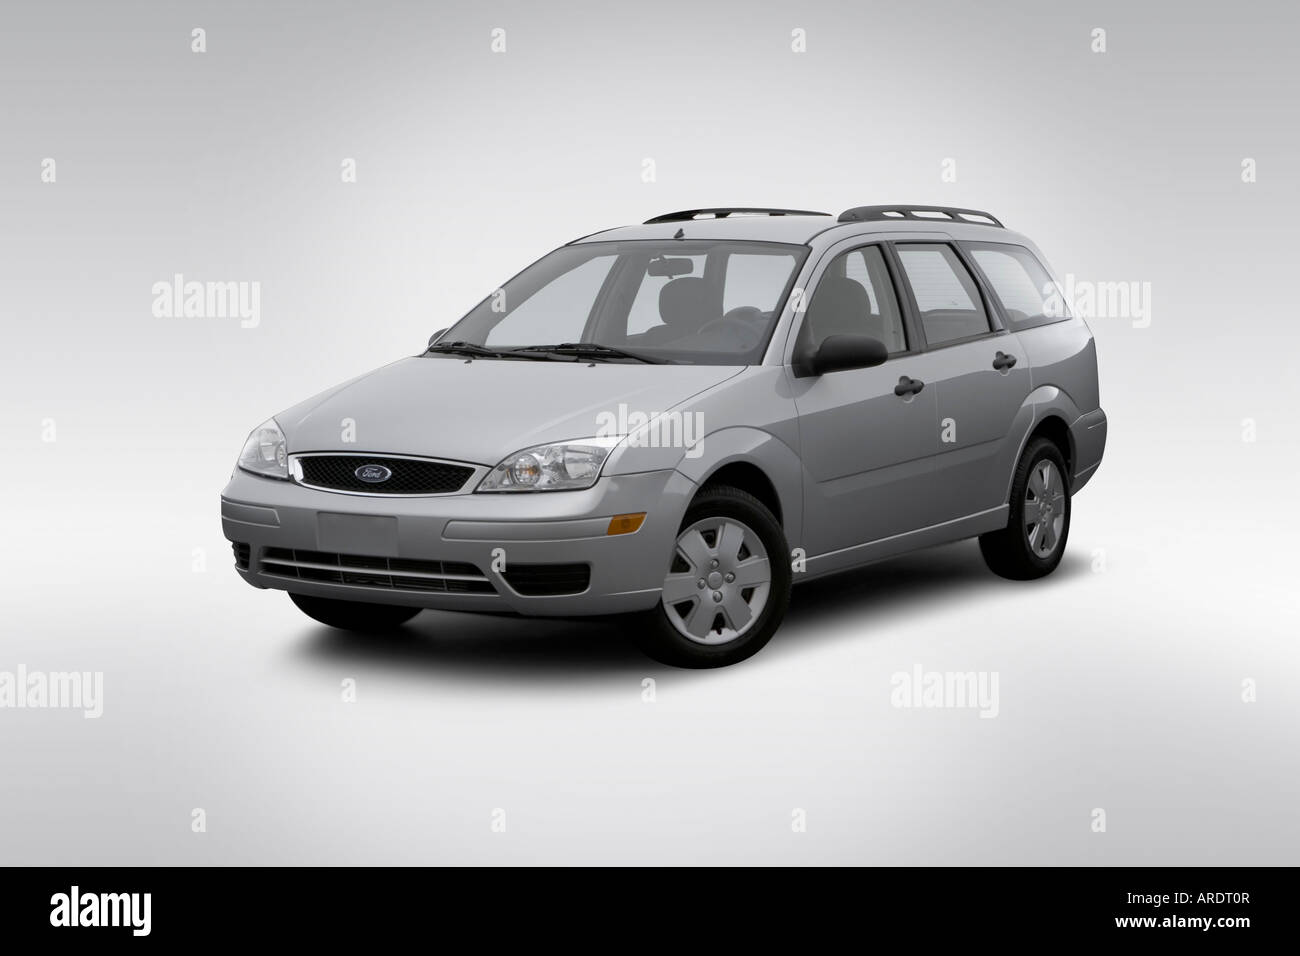 2007 Ford Focus for Sale with Photos  CARFAX